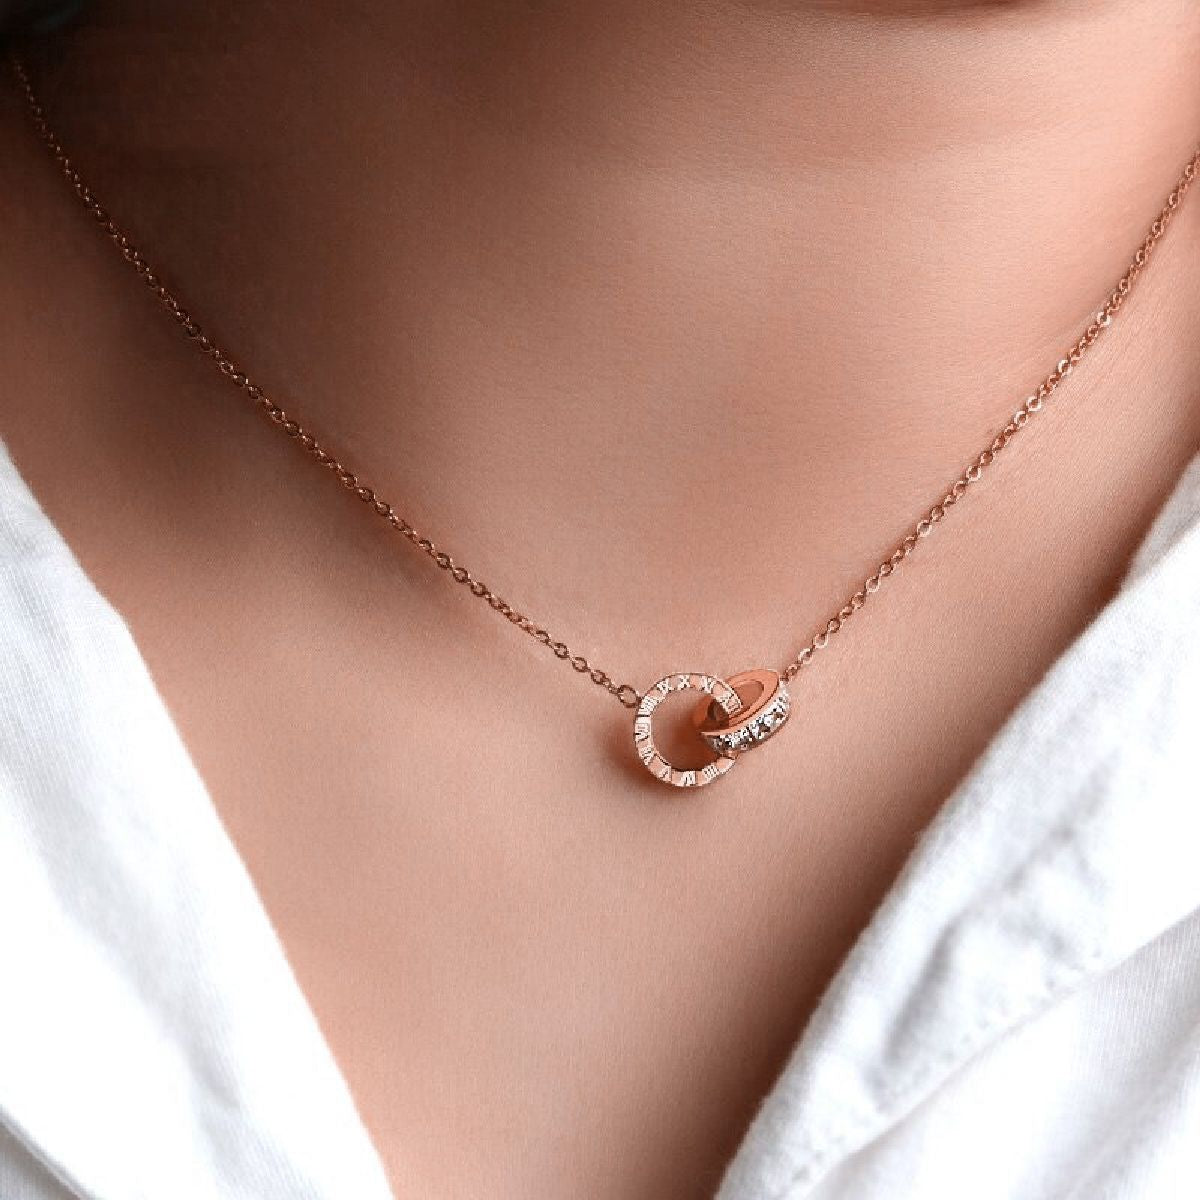 Jewellery - Elan Necklace in rose gold one size | DW